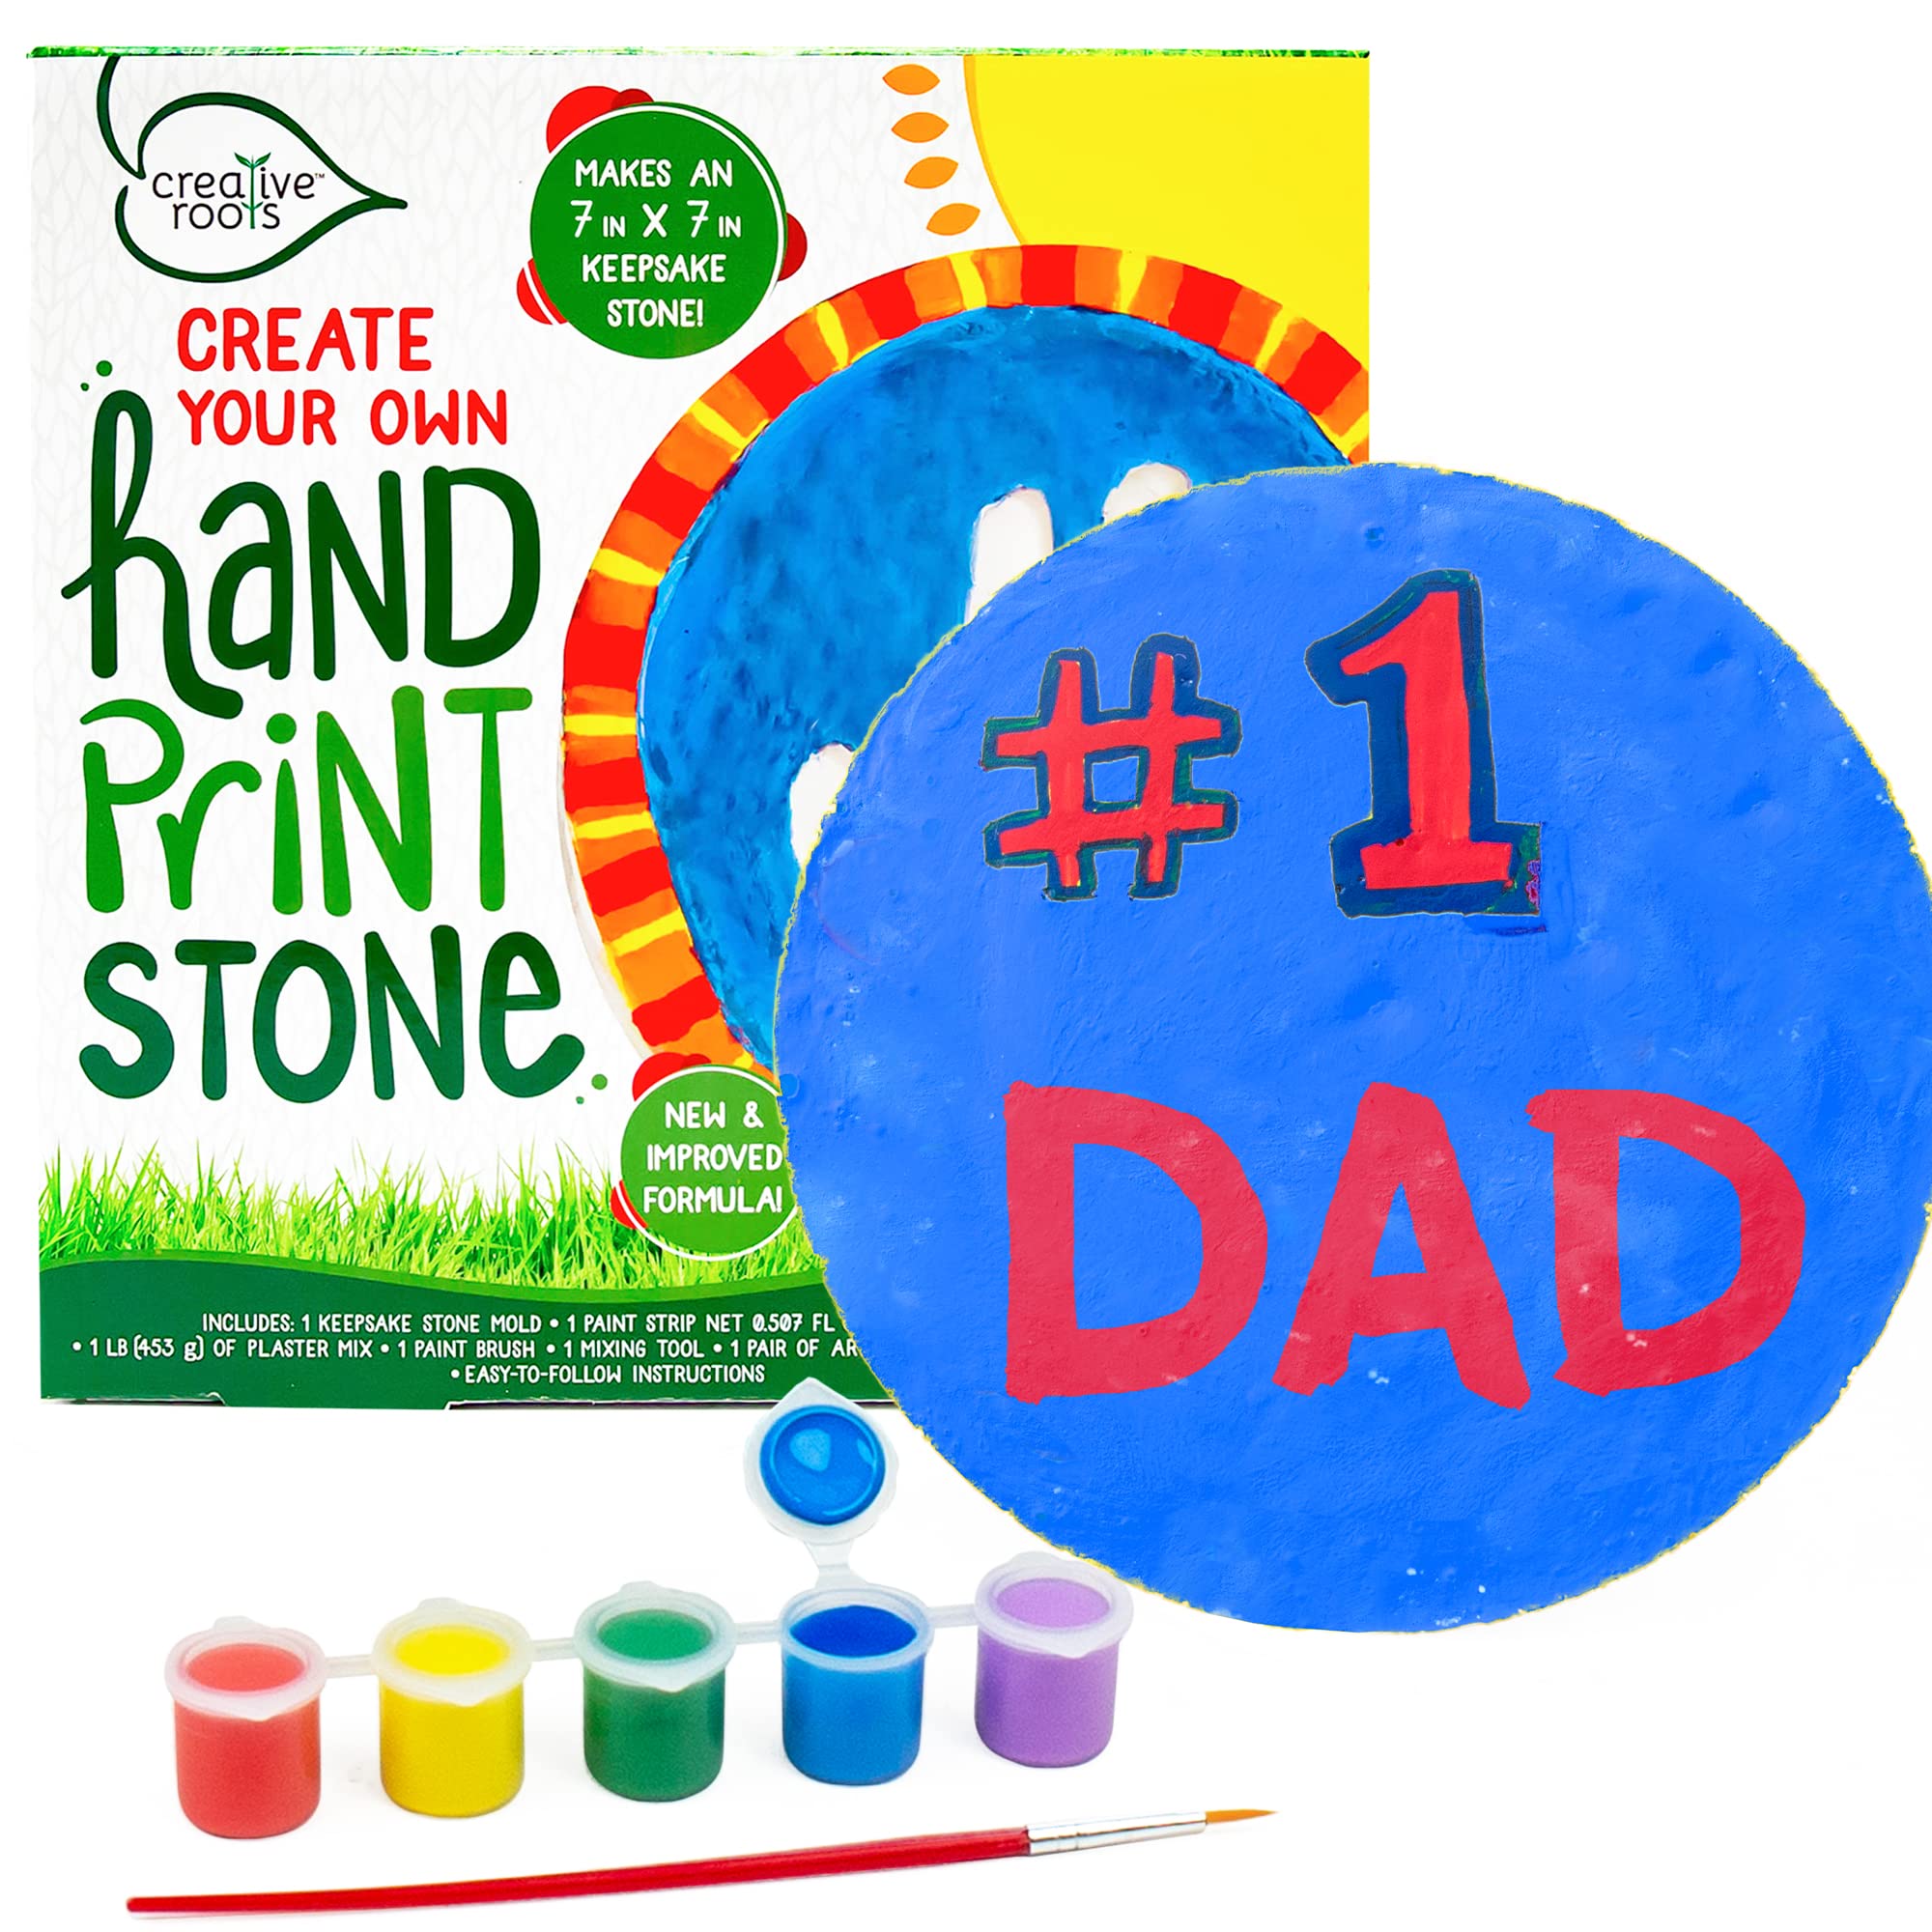 Creative Roots Create Your Own Handprint Stone, Arts and Crafts, Kids Crafts,  Craft Kits, Stepping Stones, Craft Kit, Hand Casting Kit, Crafts for Kids,  DIY Kits, Art Kits, Hand Mold Kit, Ages